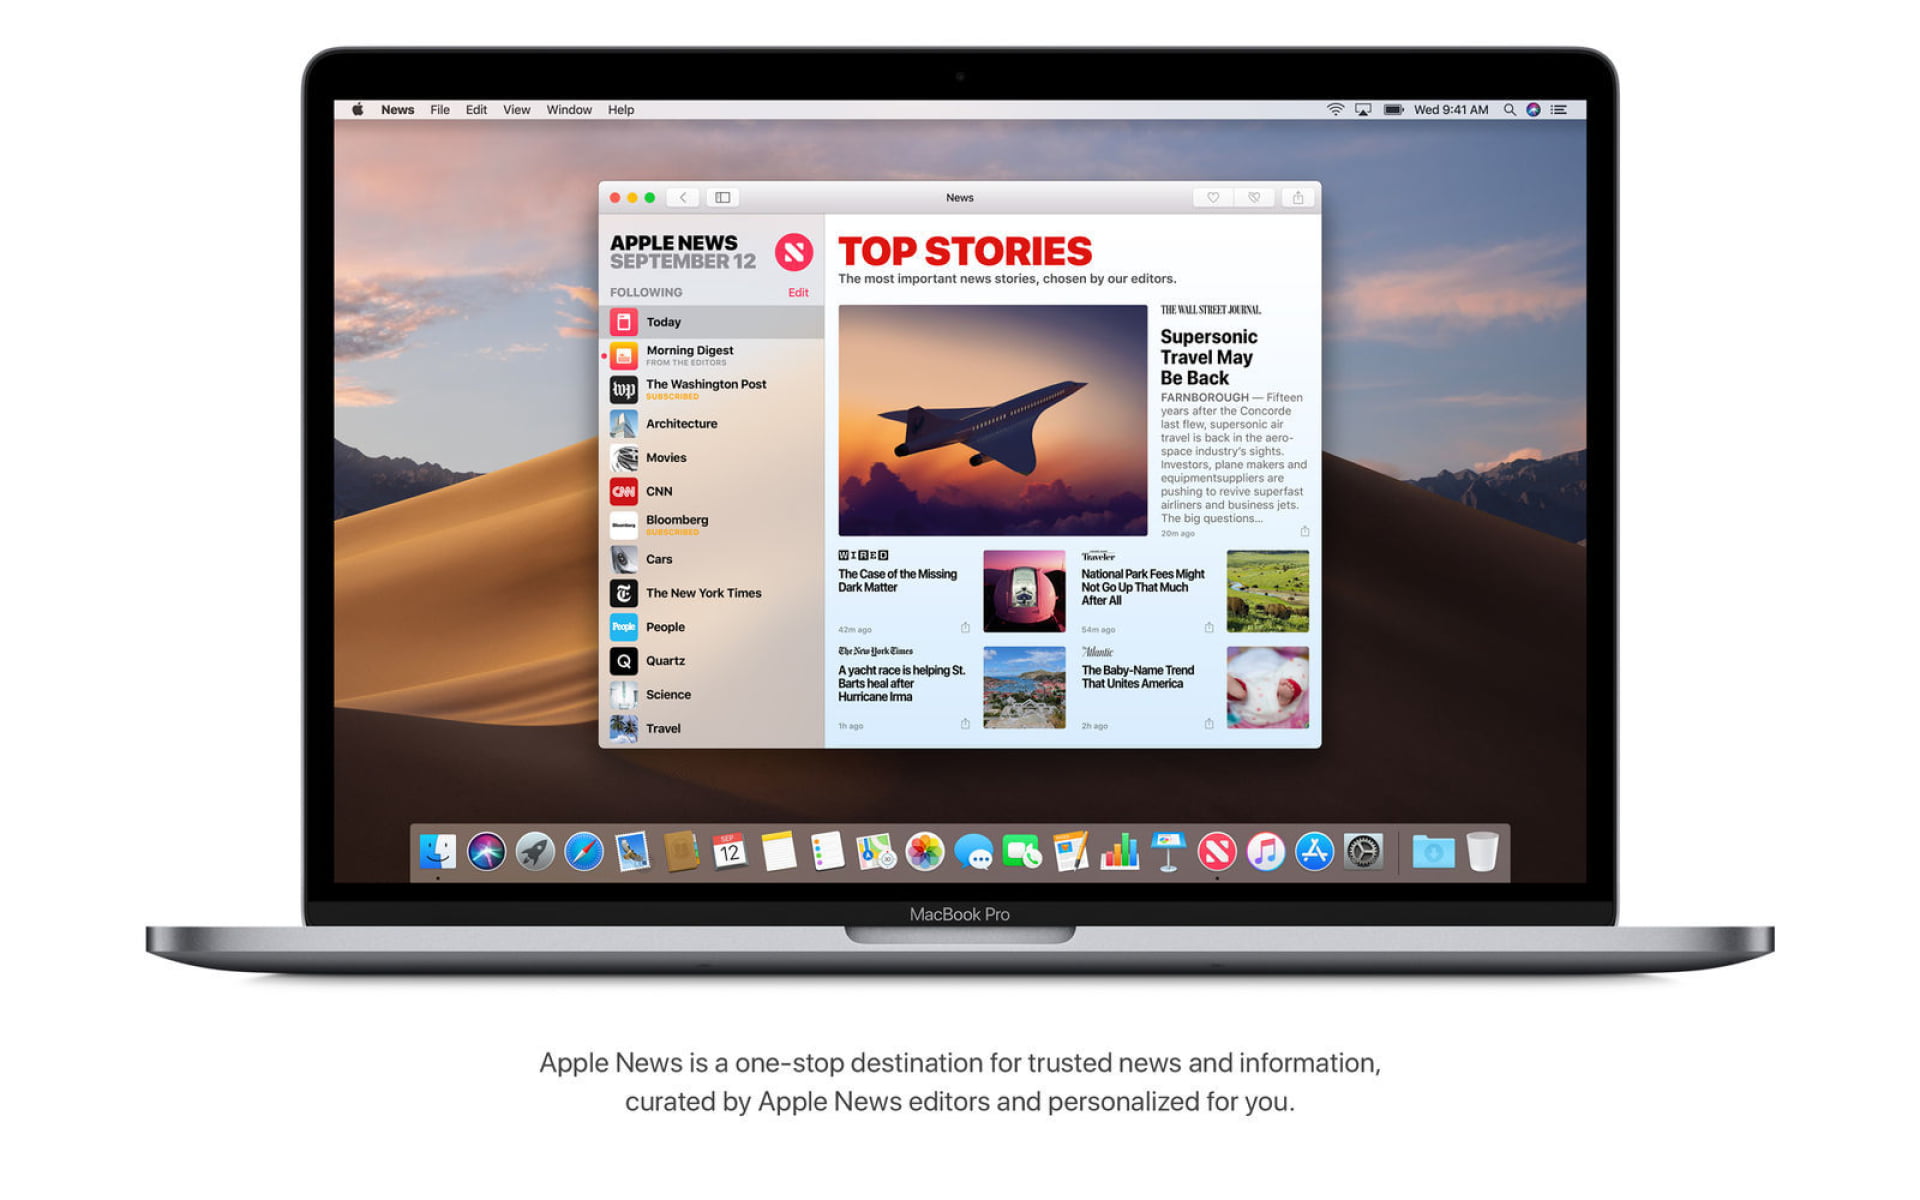 Apple Releases macOS Mojave 10.14.4 With Support for Apple News+, Dark Mode for Websites, More [Download]